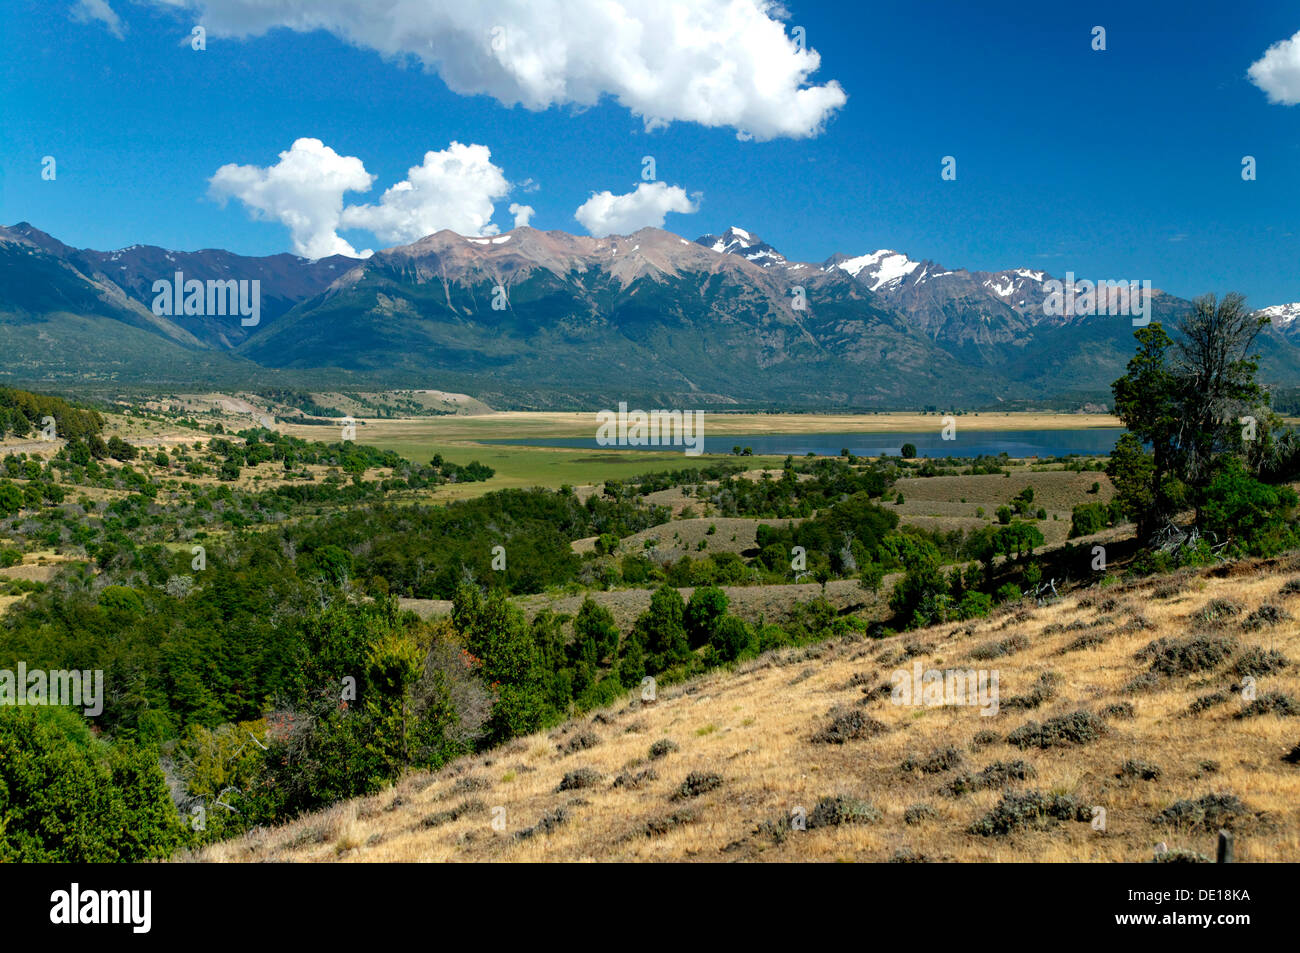 Los Alerces National Park, Esquel, Chubut Province, Patagonia, Argentina, South America Stock Photo